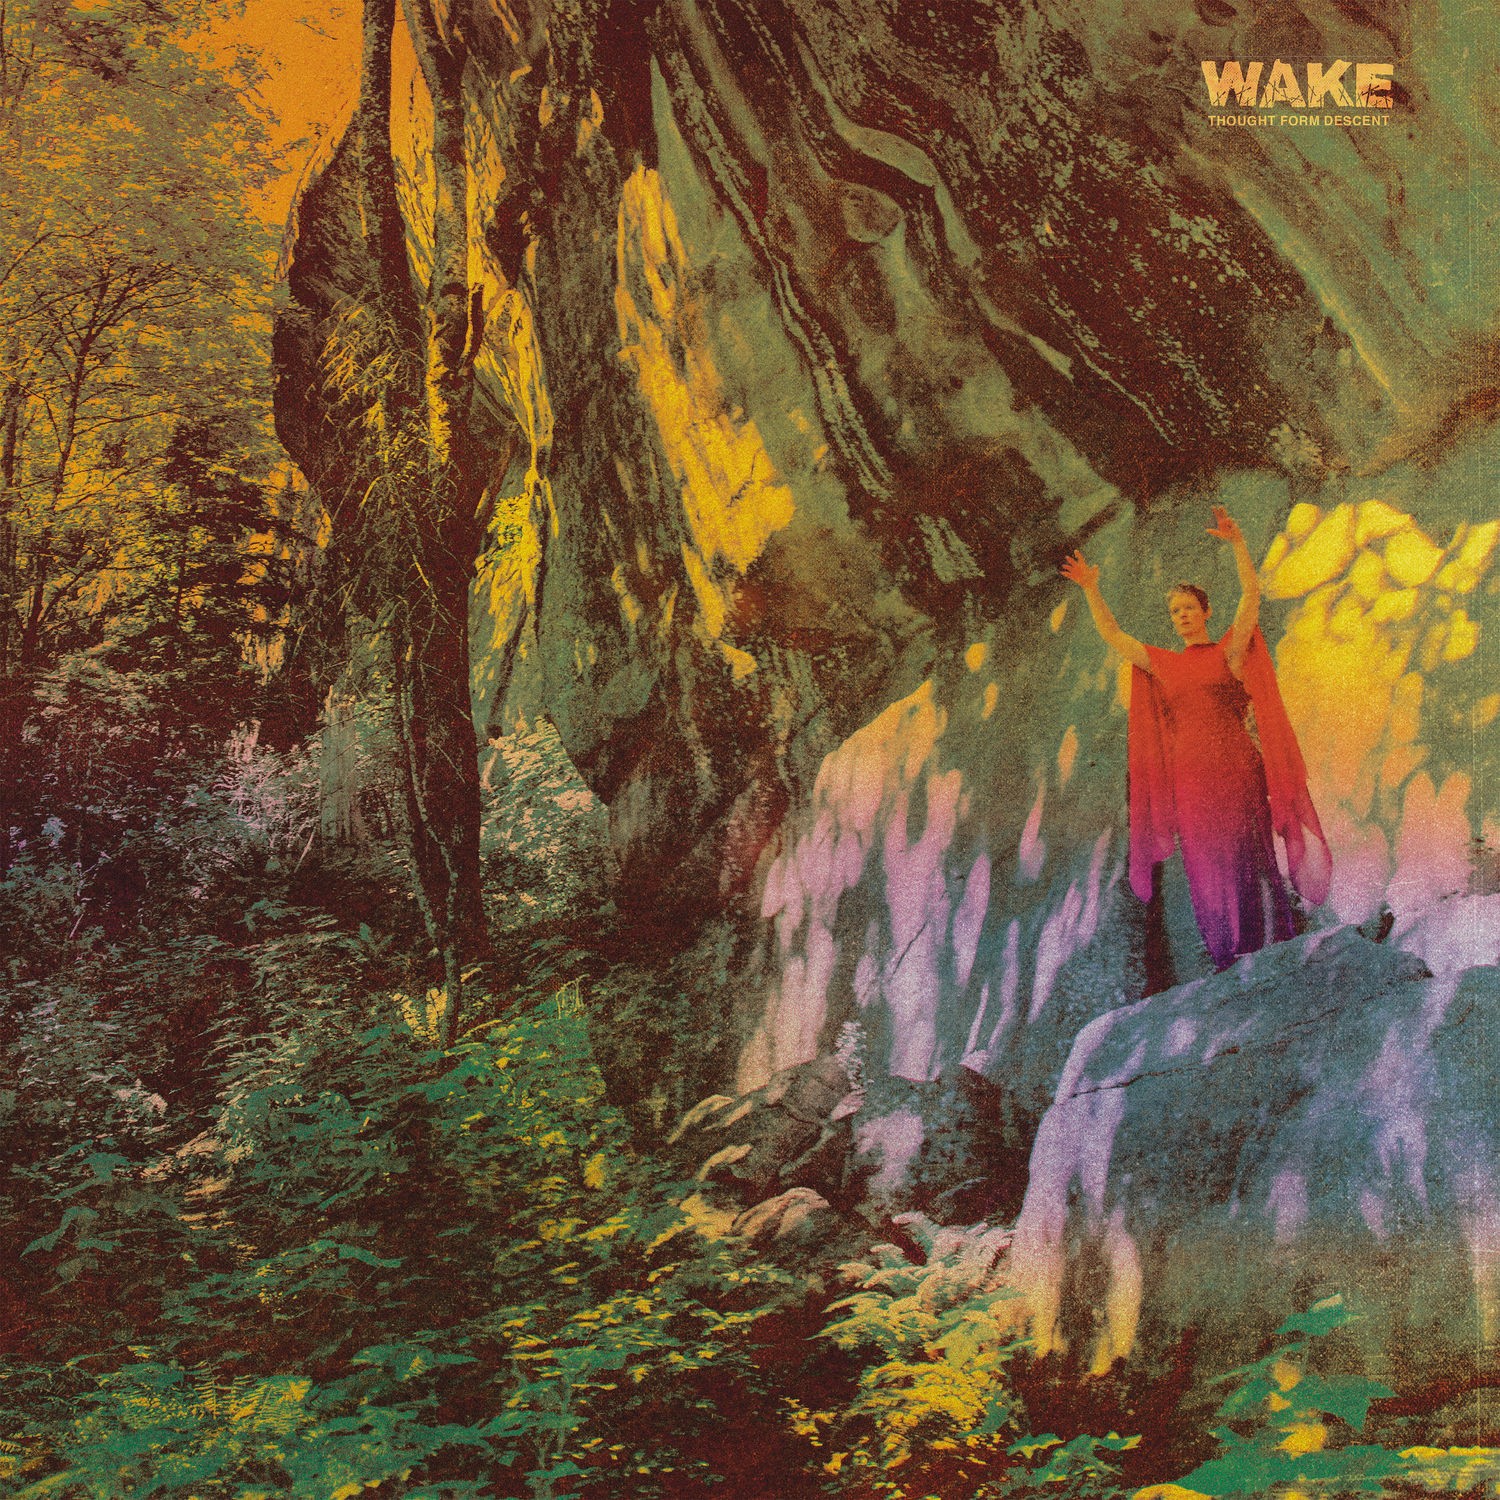 Wake - Thought Form Descent (2022) MP3 320kbps Download